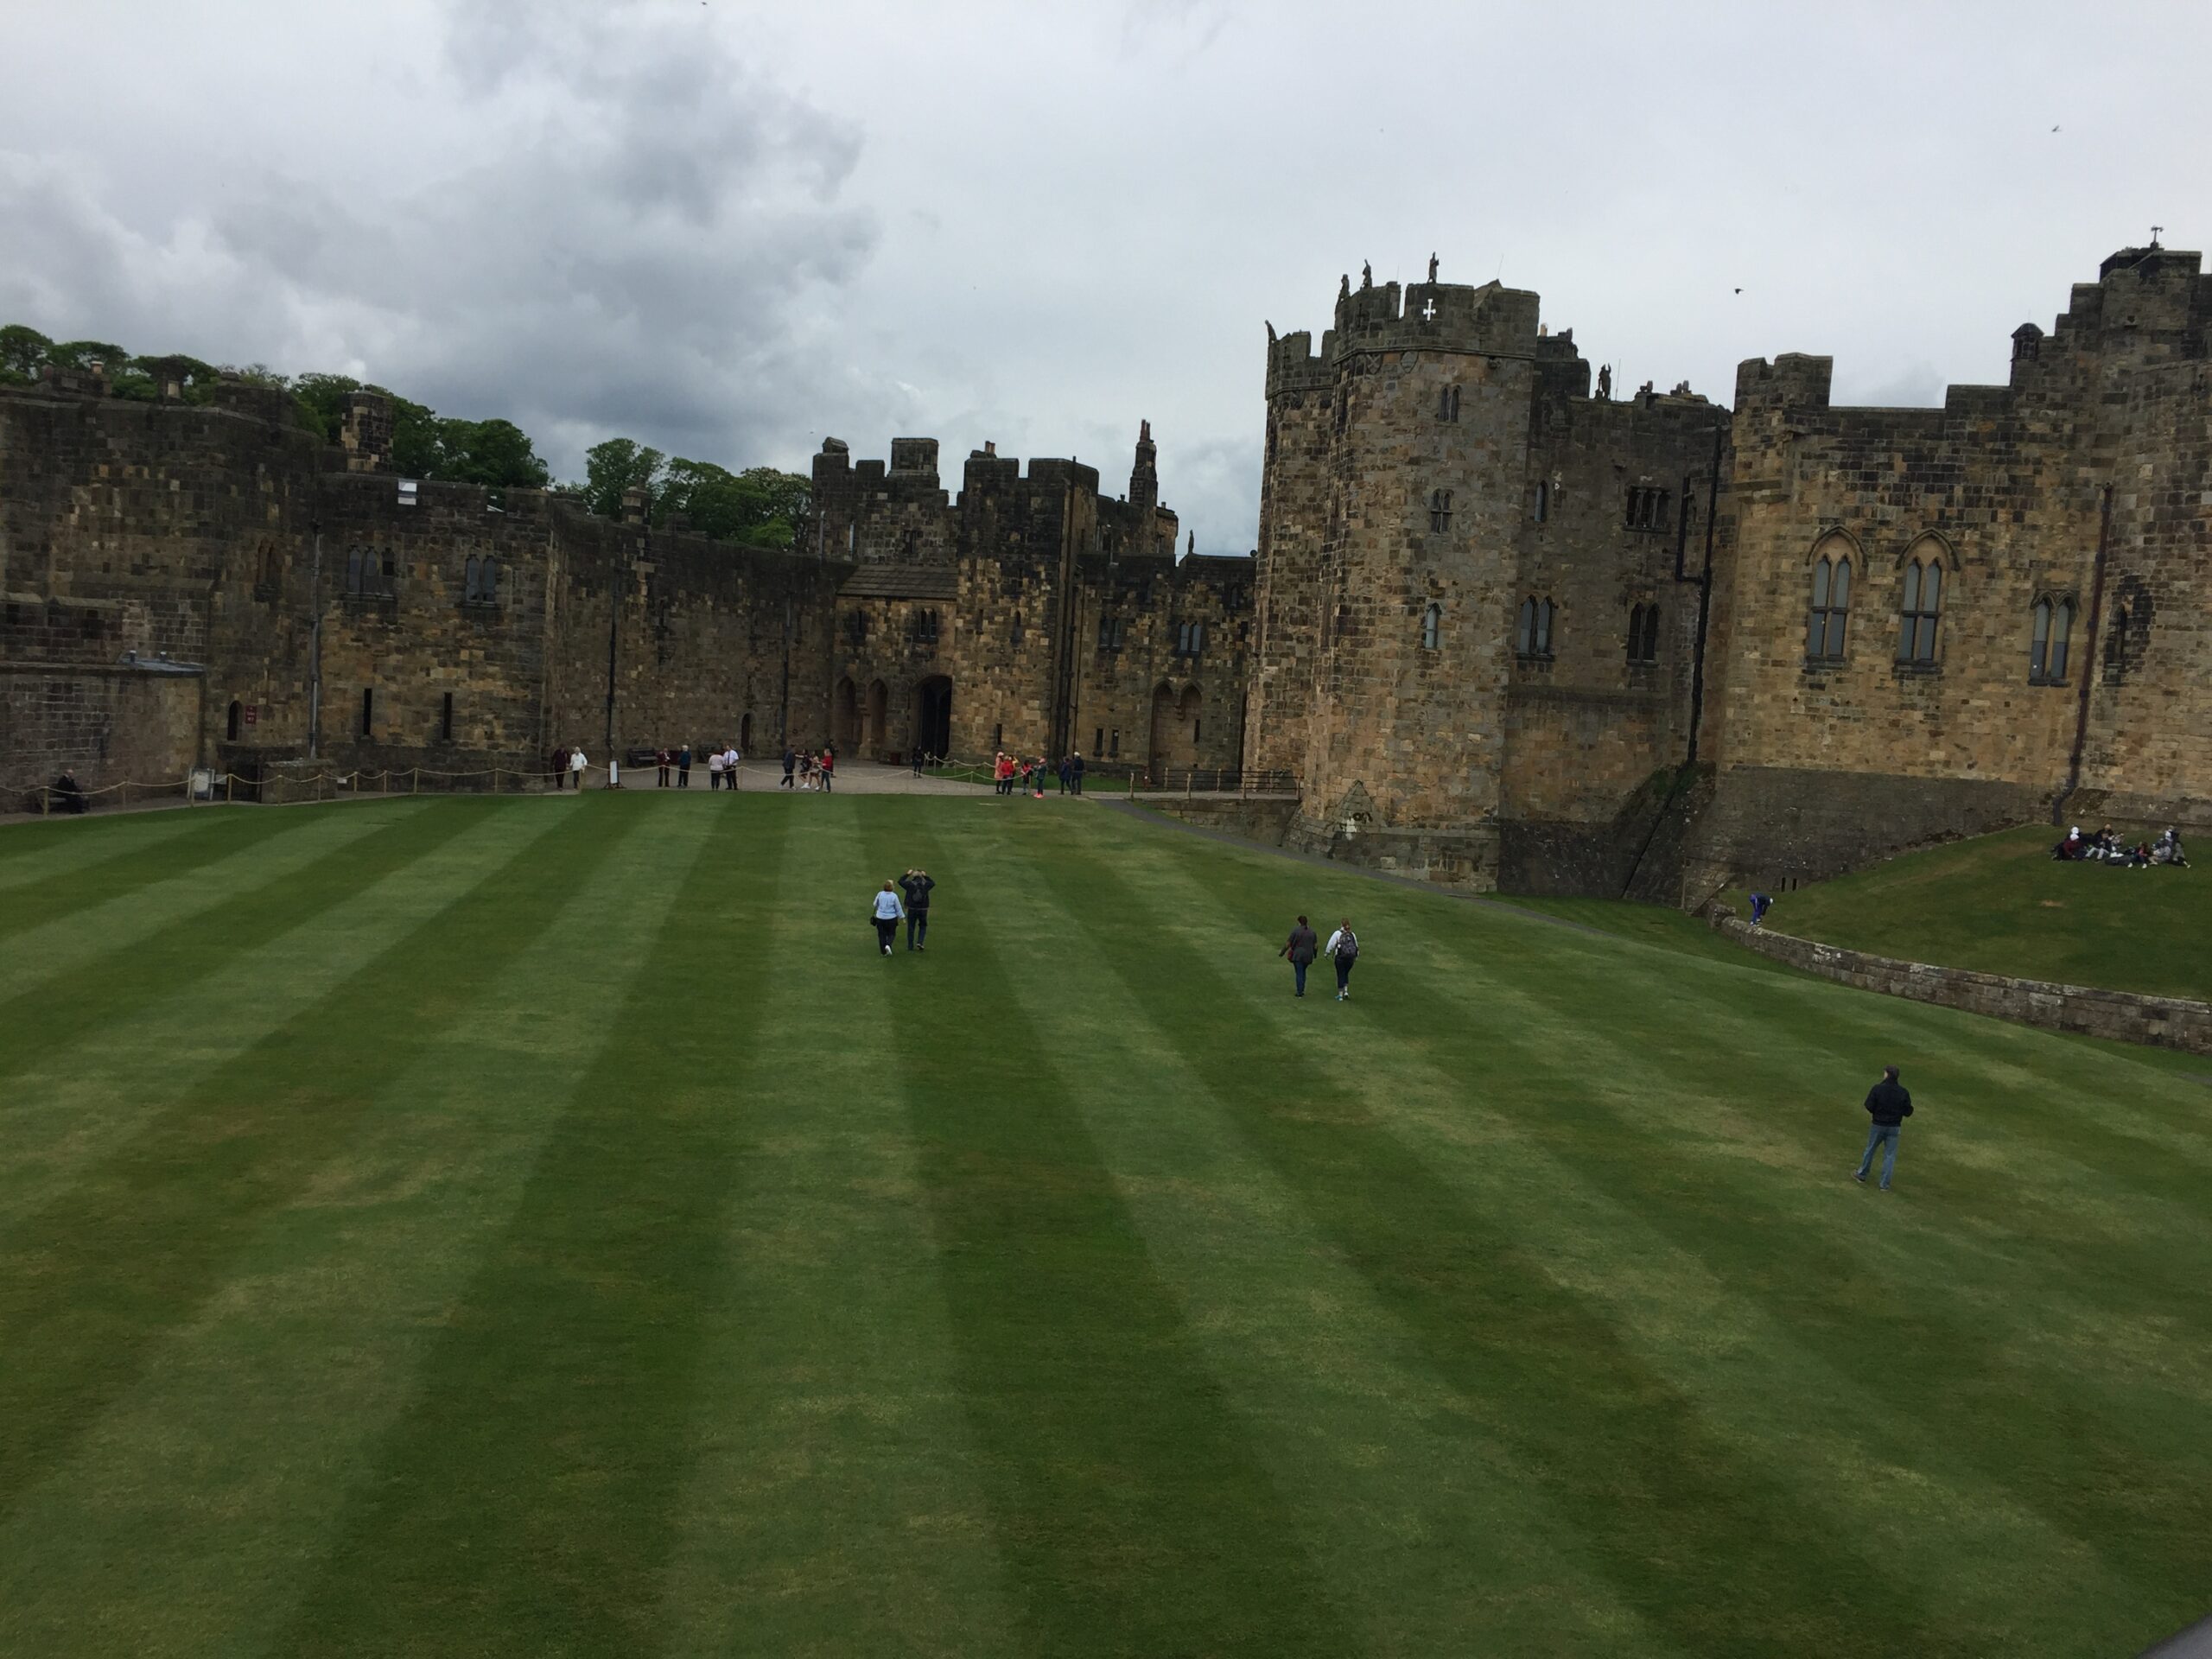 This view of the Alnwick Castle grounds made me feel like I was at Hogwarts.